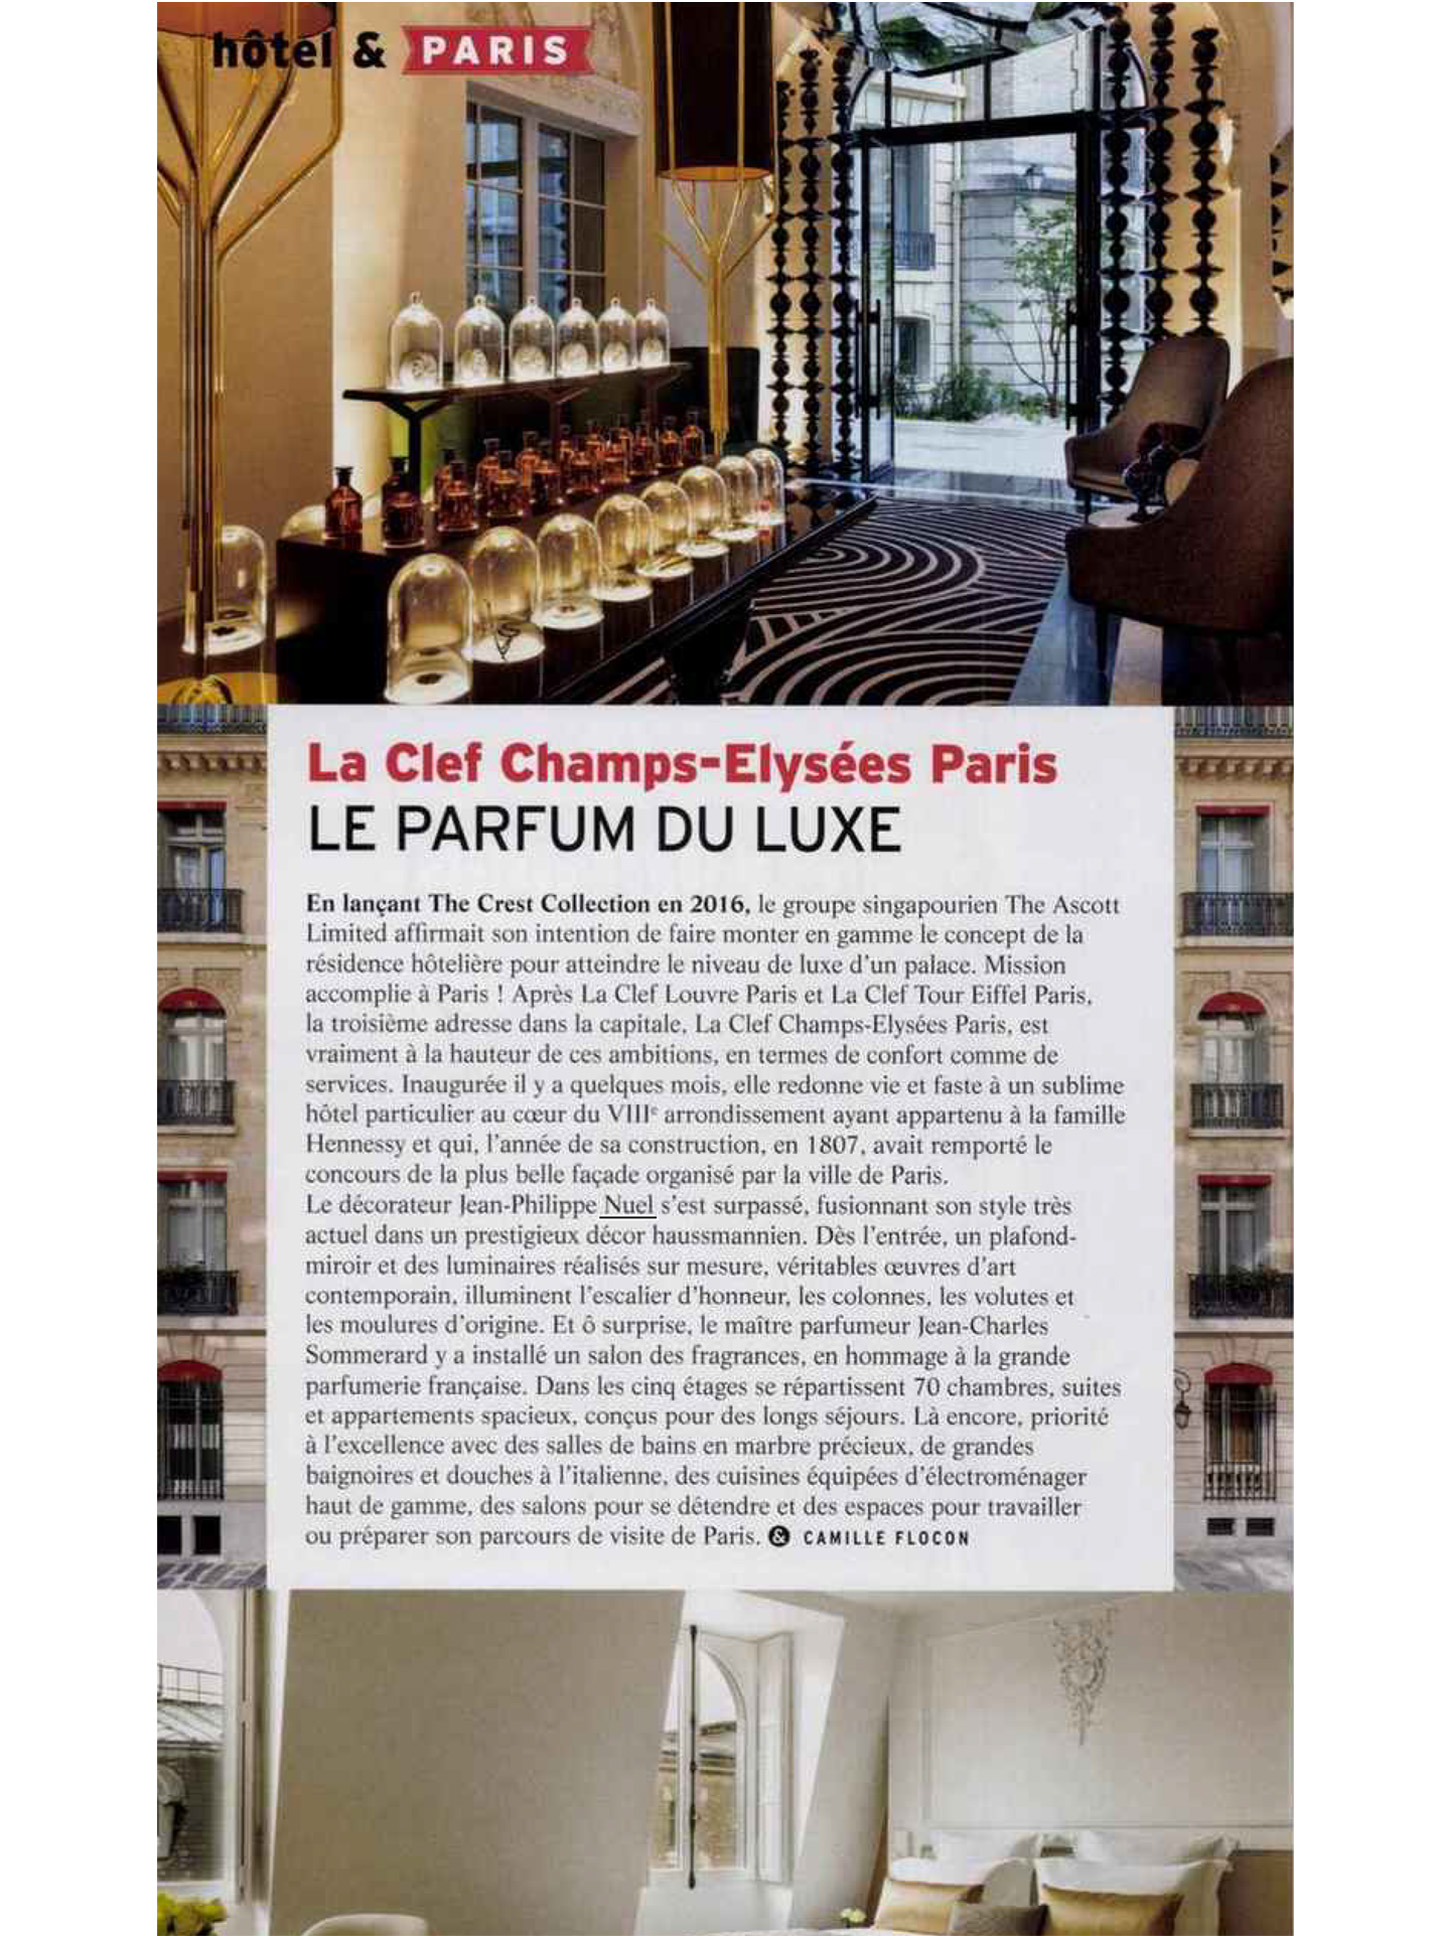 article on ascott limited's champs elysees key by interior design studio jean-philippe nuel